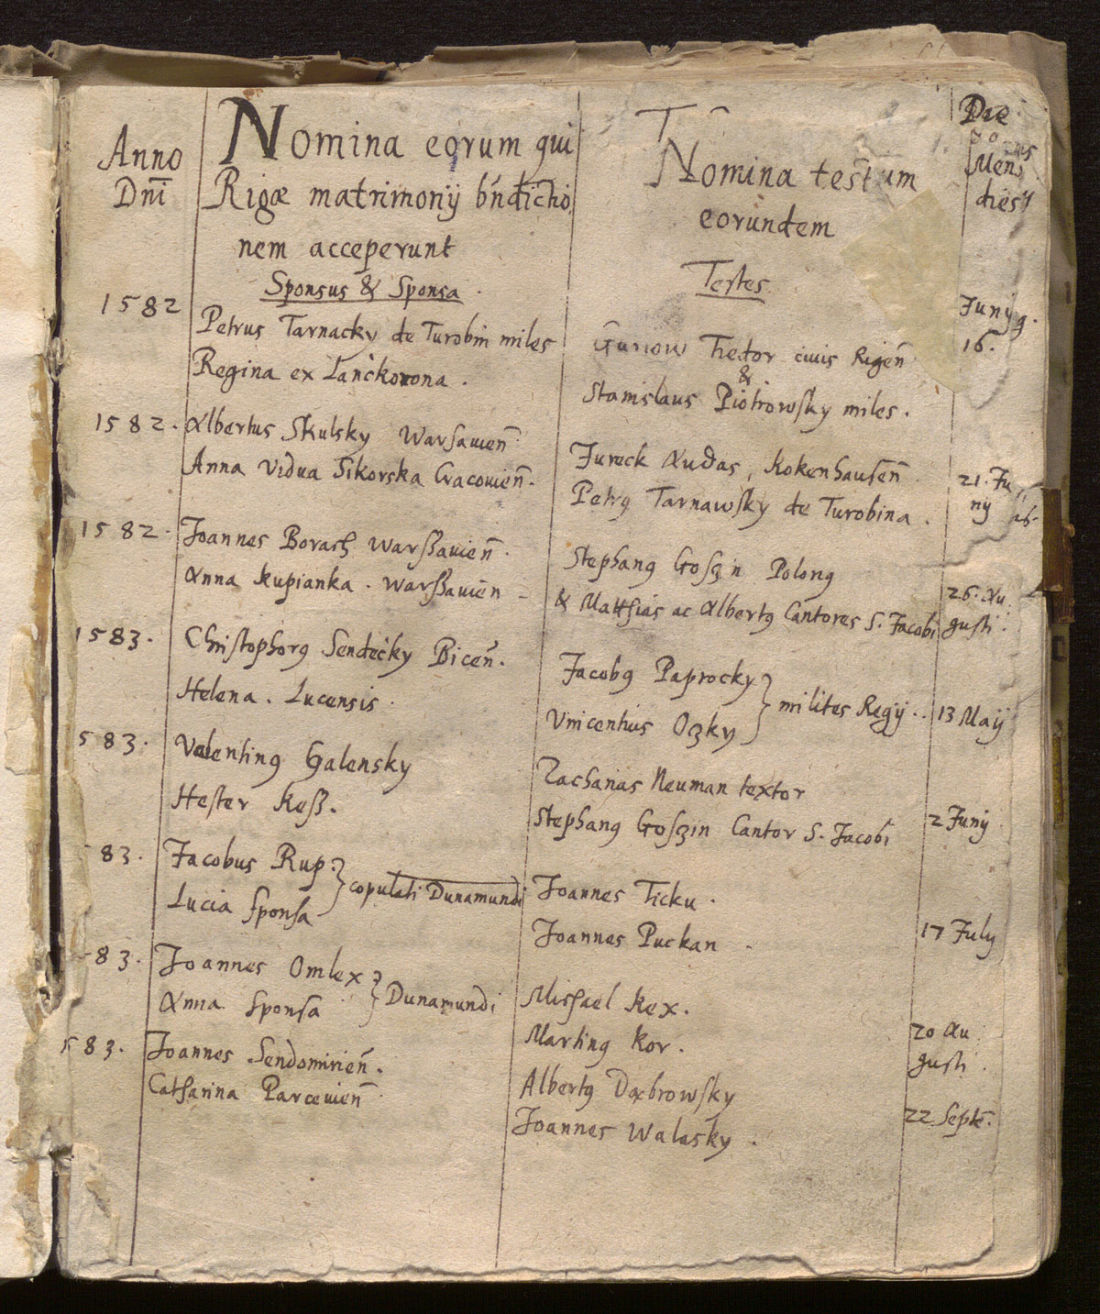 The wedding and baptisms register of Riga St. James’ Church (1582-1621).